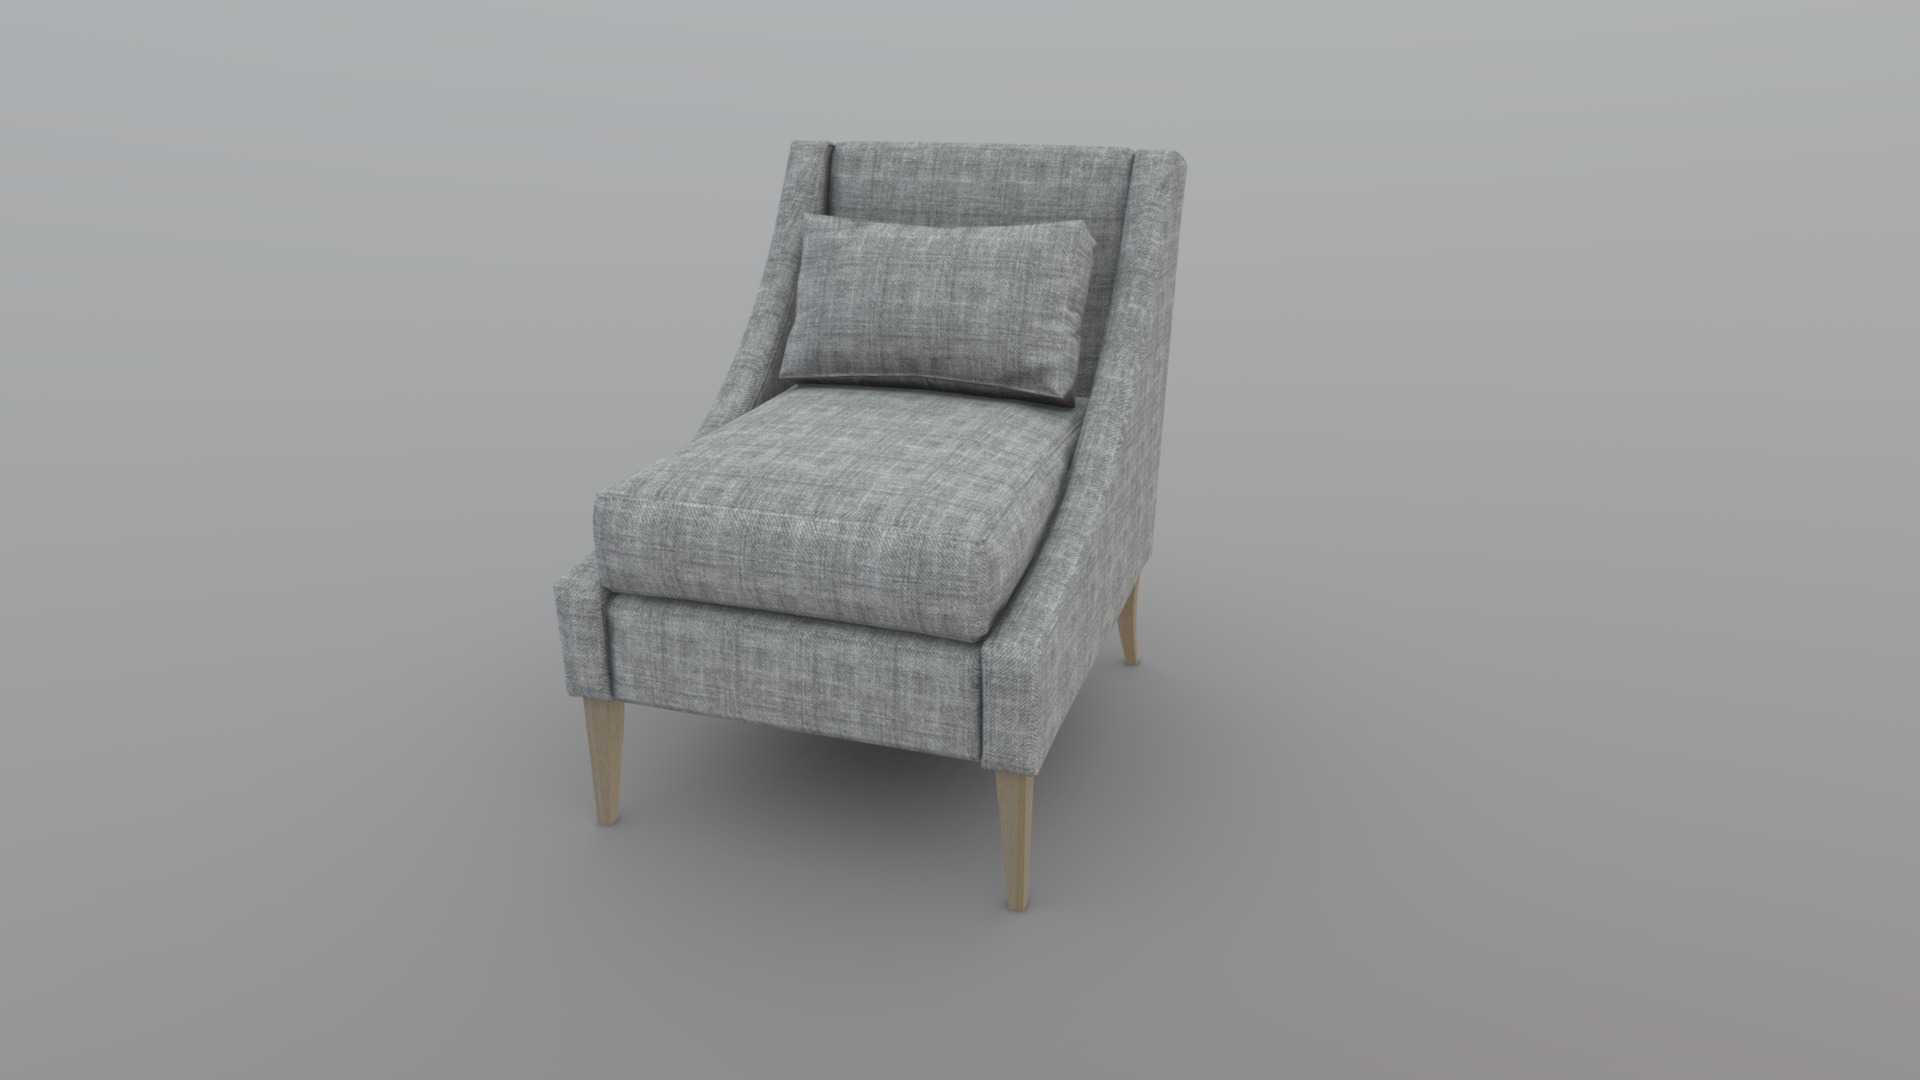 3D model LowPoly Sofa - This is a 3D model of the LowPoly Sofa. The 3D model is about a grey chair with a cushion.